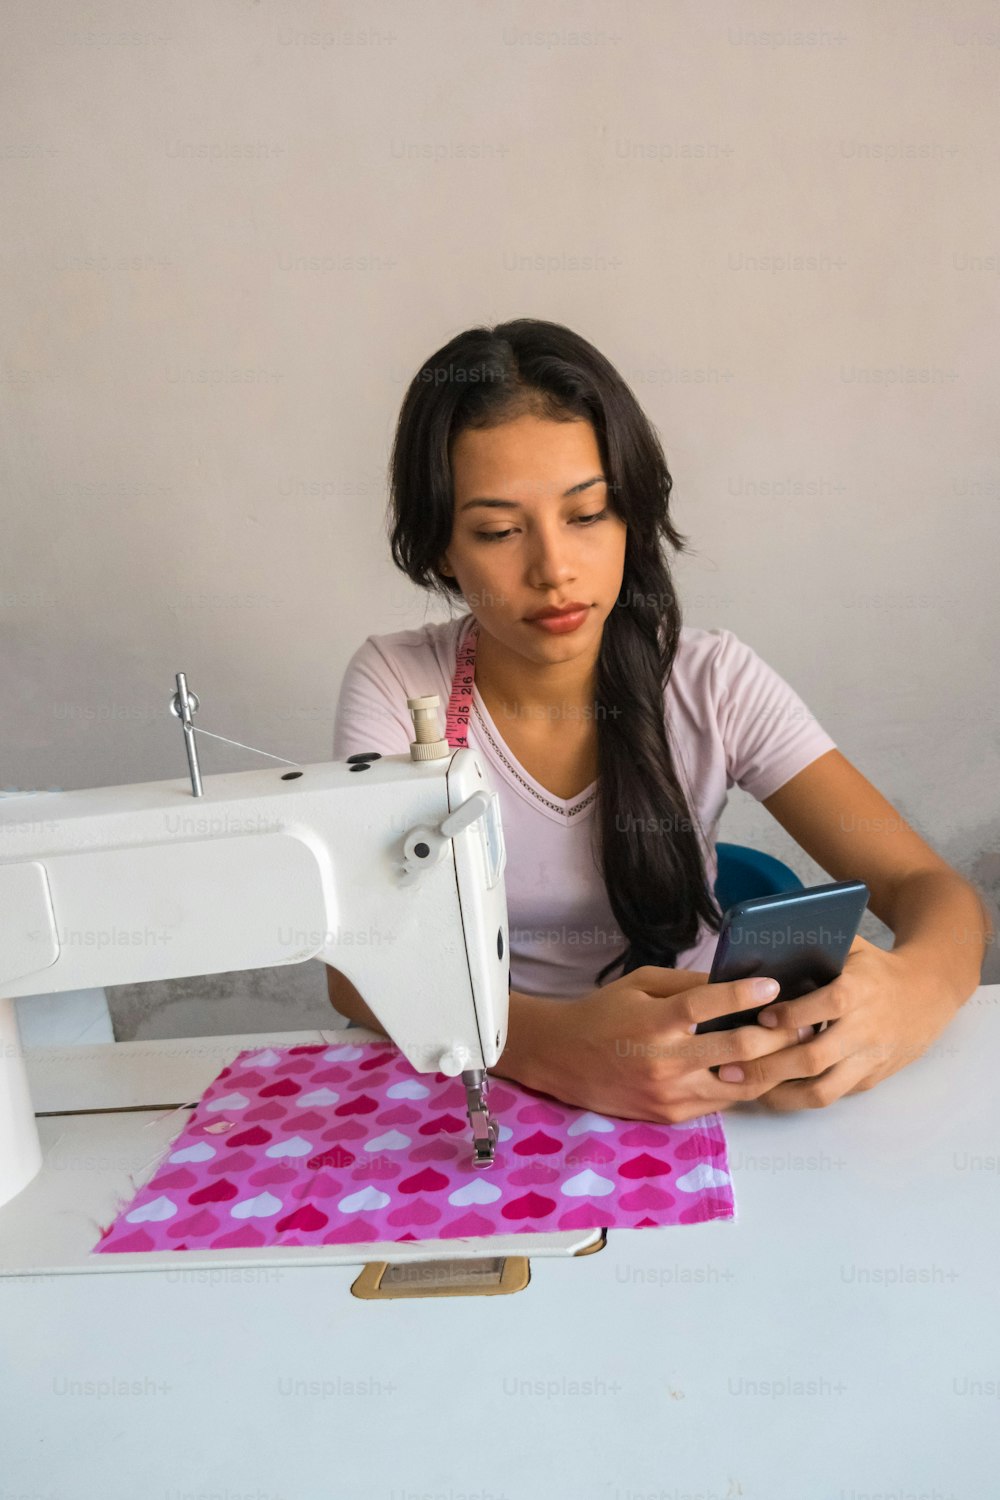 A charming young woman who uses her smartphone while working in the tailor's shop.